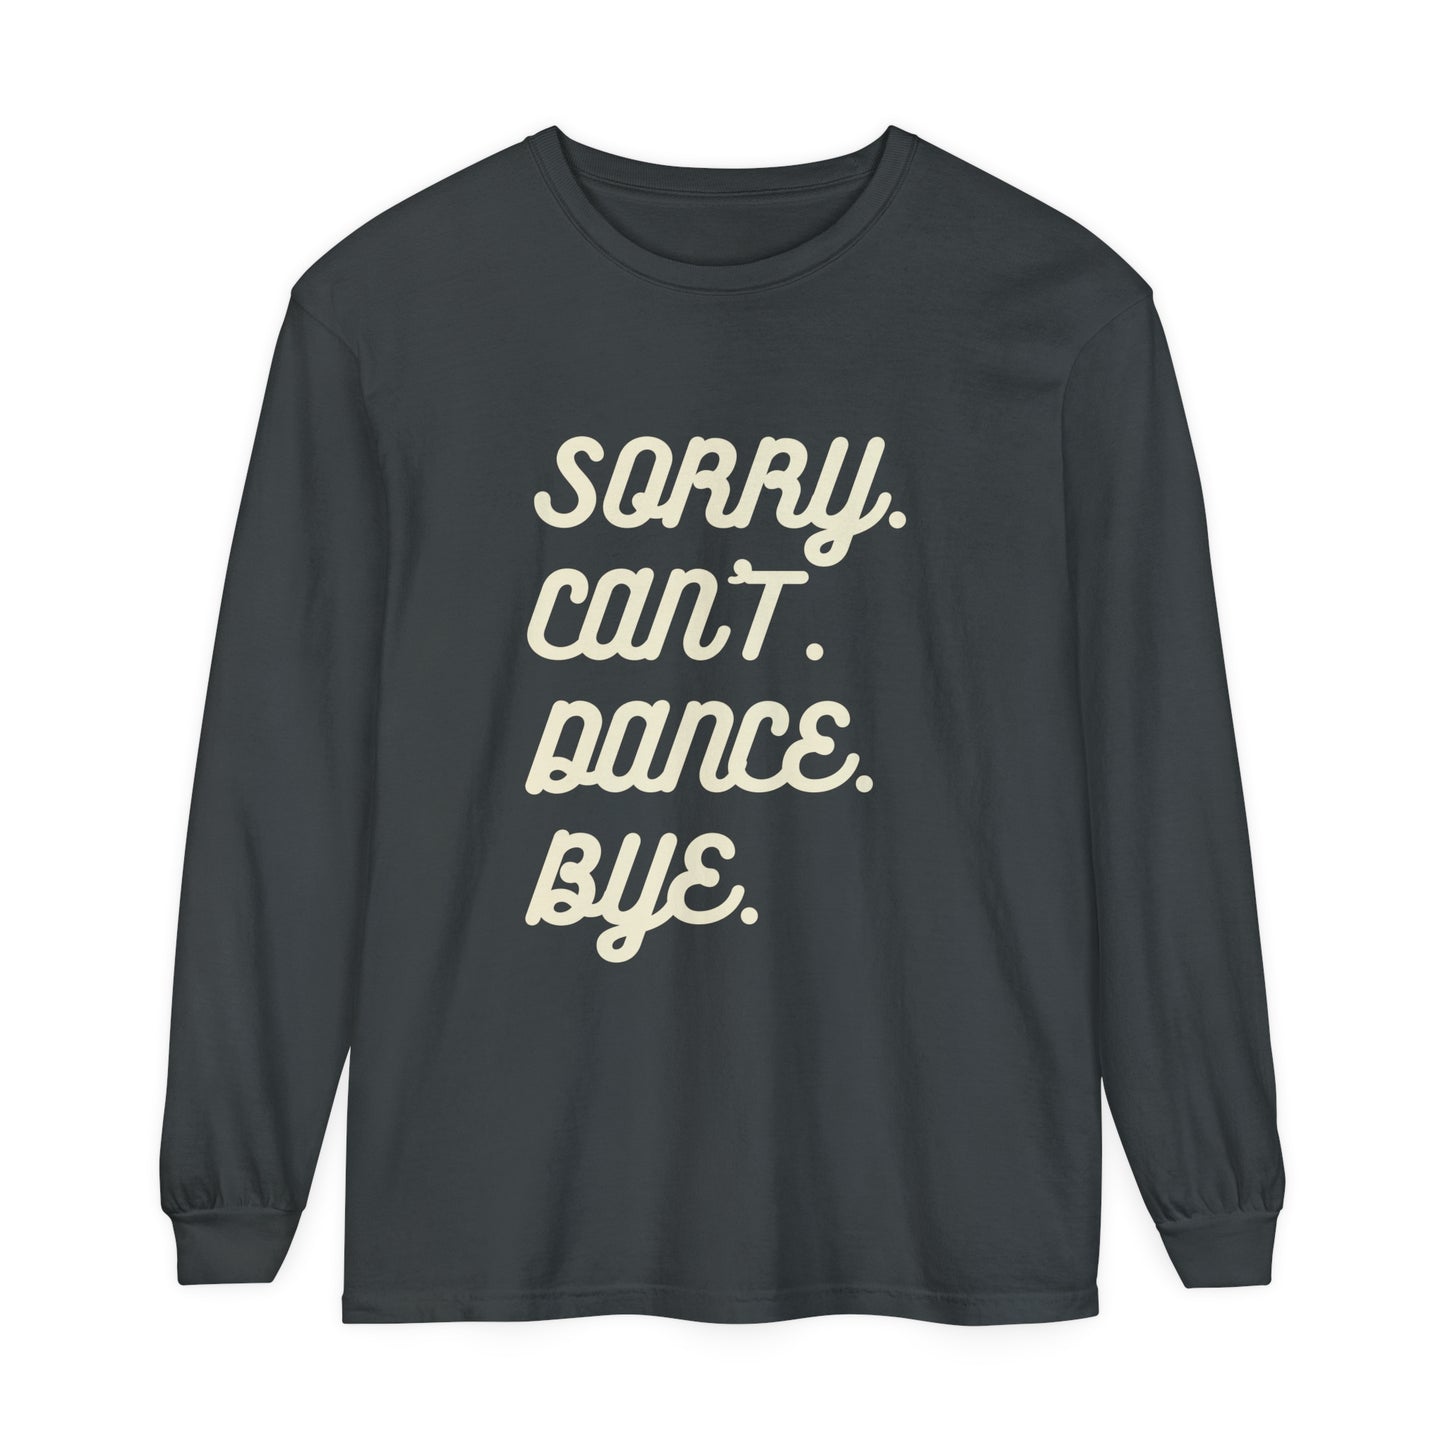 Sorry. Can't. Dance. Bye. Style 2 Women's Loose Long Sleeve T-Shirt